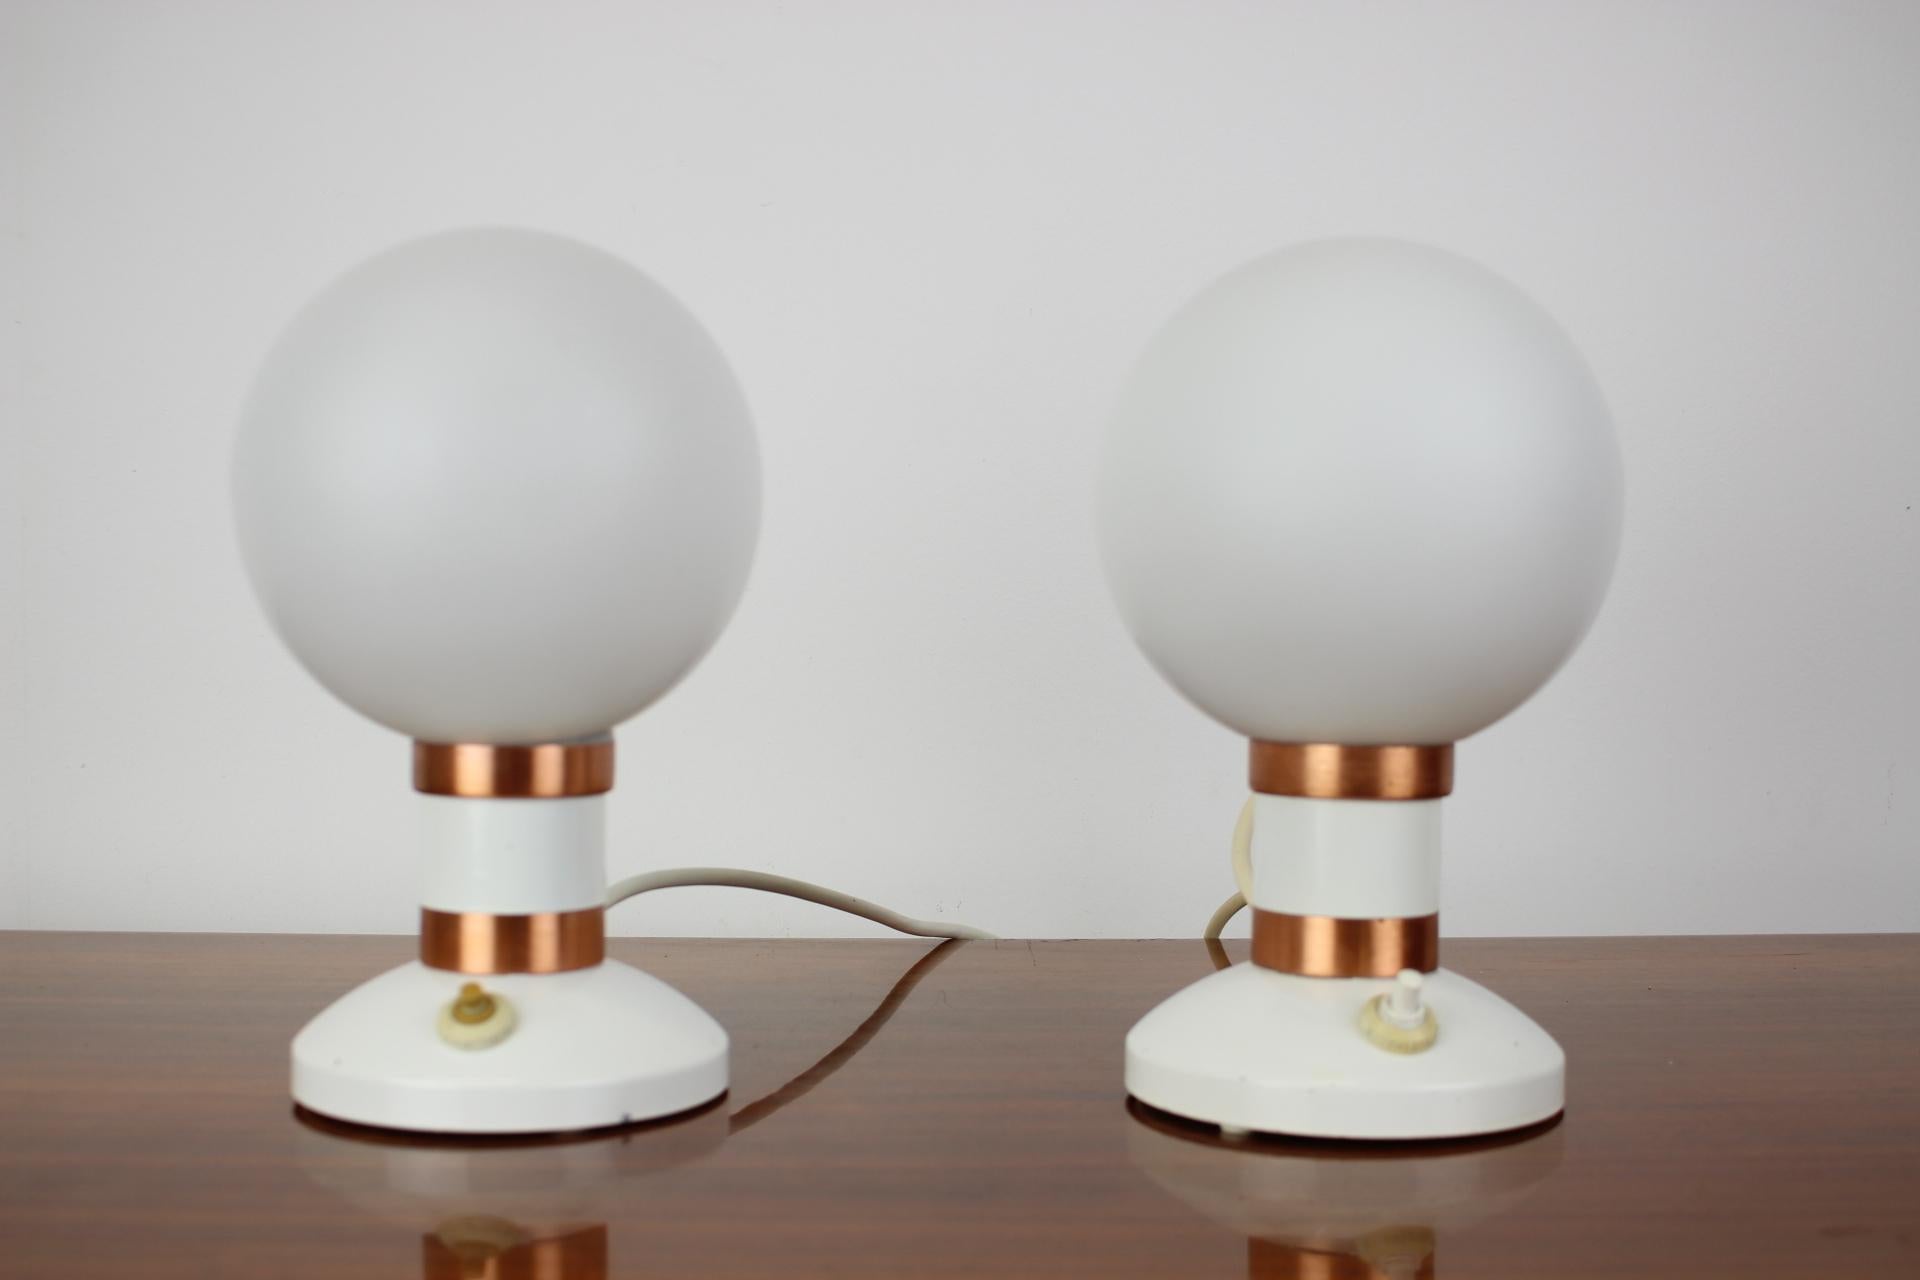 - Made in Czechoslovakia
- Made of metal, glass
- Re-polished
- Fully functional
- Good, original condition.
-There is an otherwise strong light bulb in the lamps so that you can see what color the shade can be.